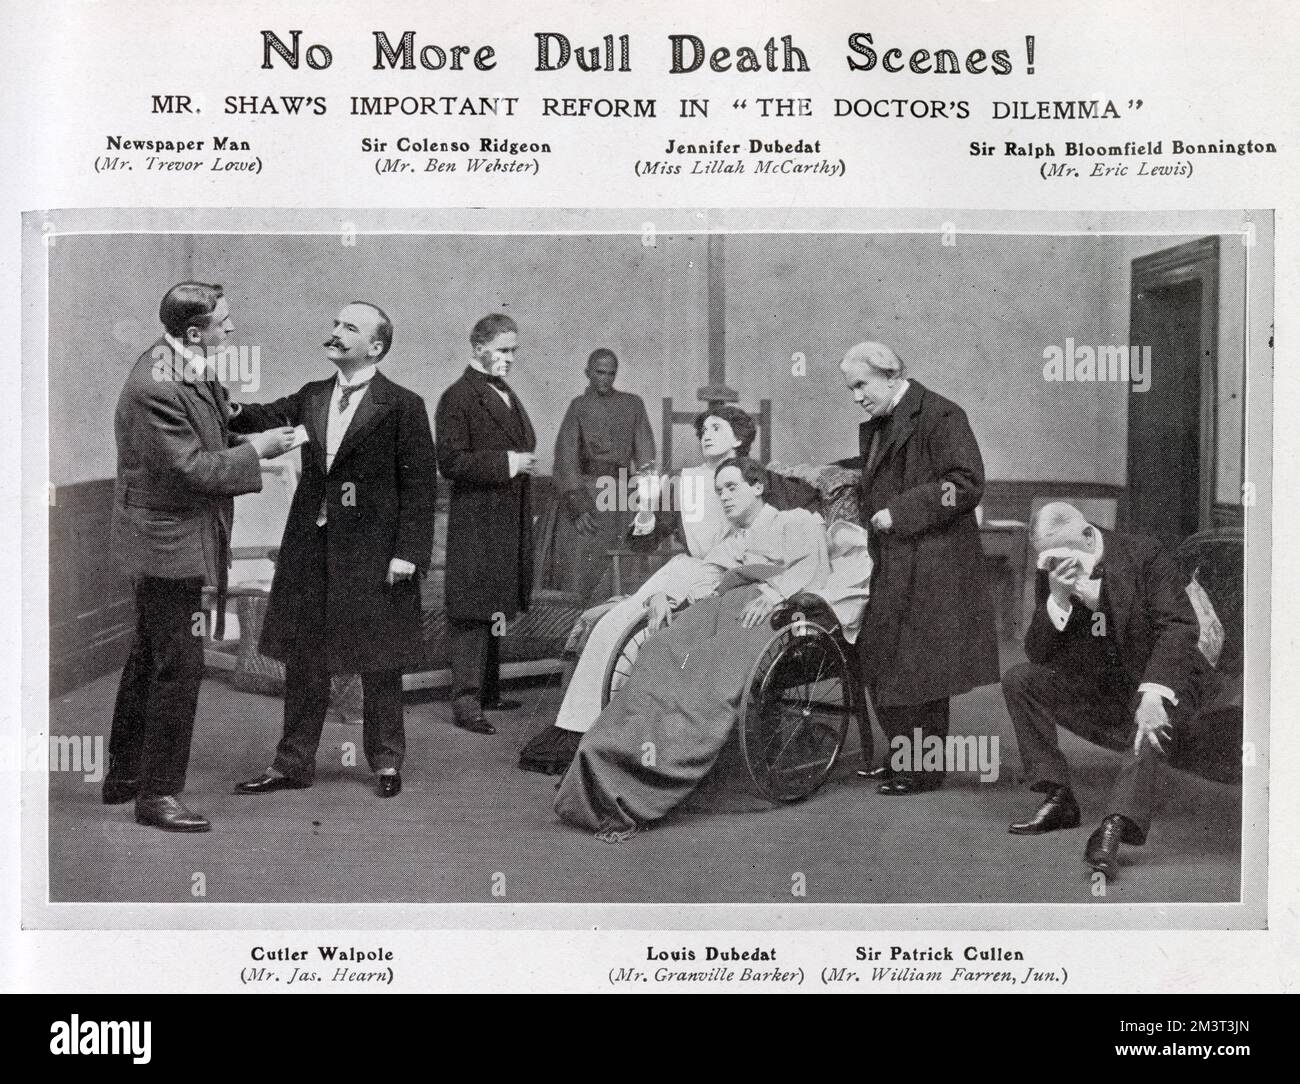 No More Dull Death Scenes! A scene from 'The Doctor's Dilemma' by George Bernard Shaw starring Ben Webster, Lillah McCarthy and Granville Barker. Here, Louis Dubedat, played by Barker announces that his plans for the next Season is to die. Stock Photo